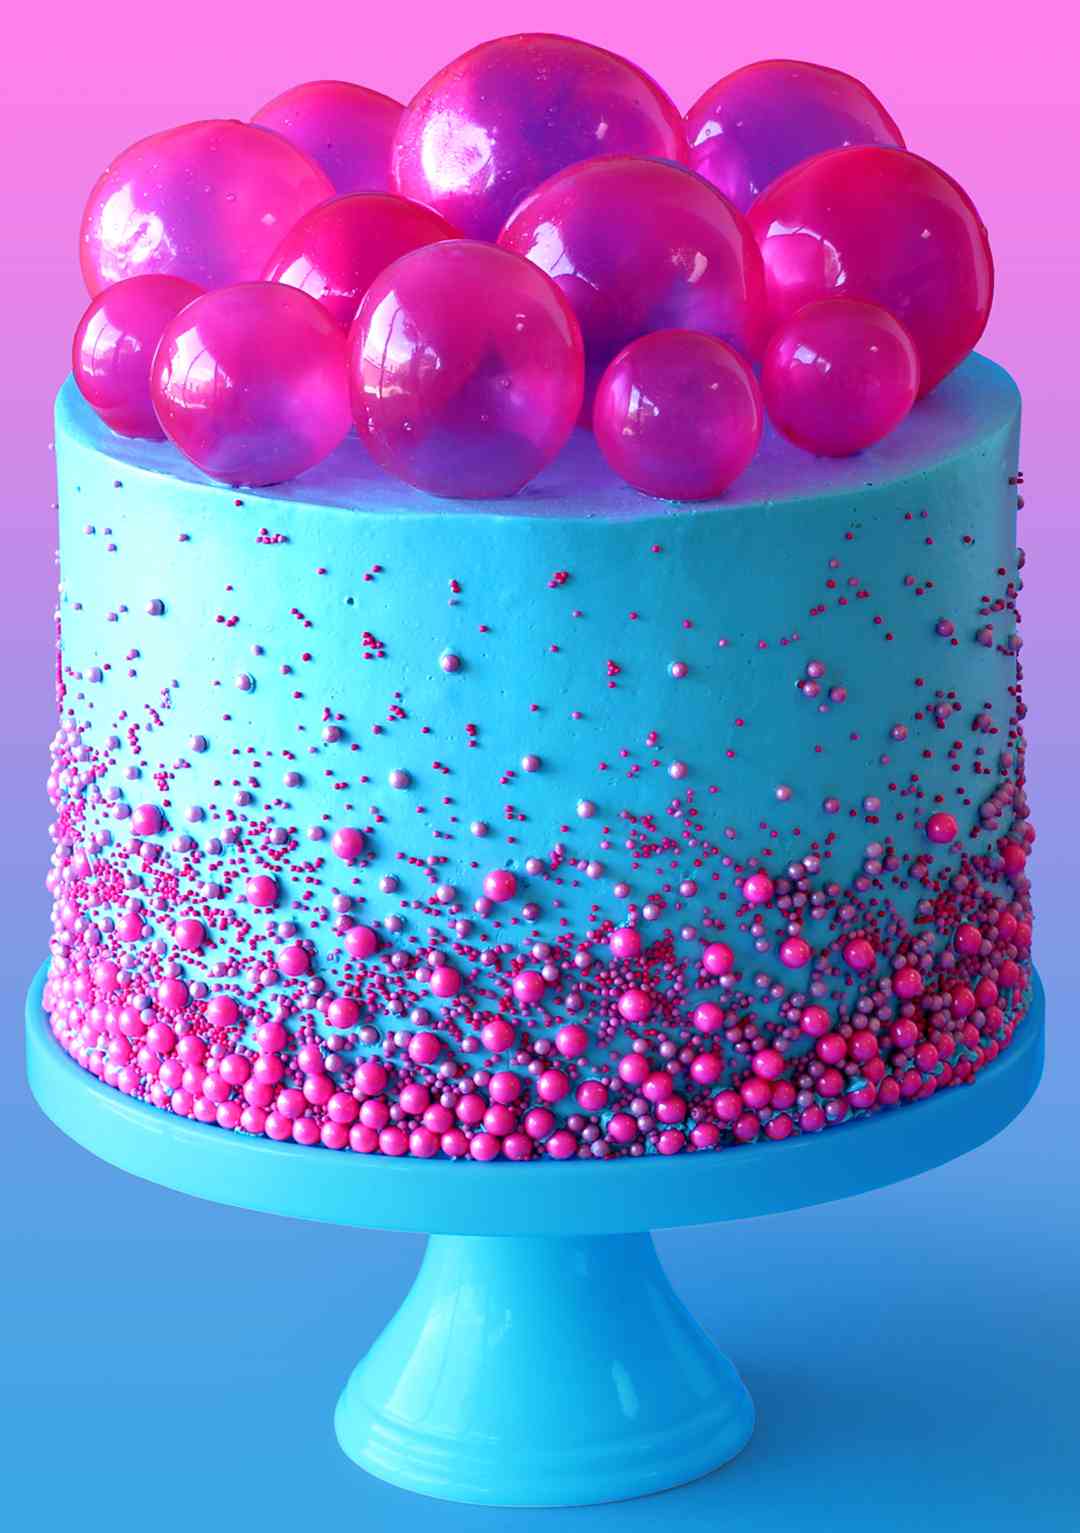 Original torte with blue glaze and pink balls, streuseln and bubbles